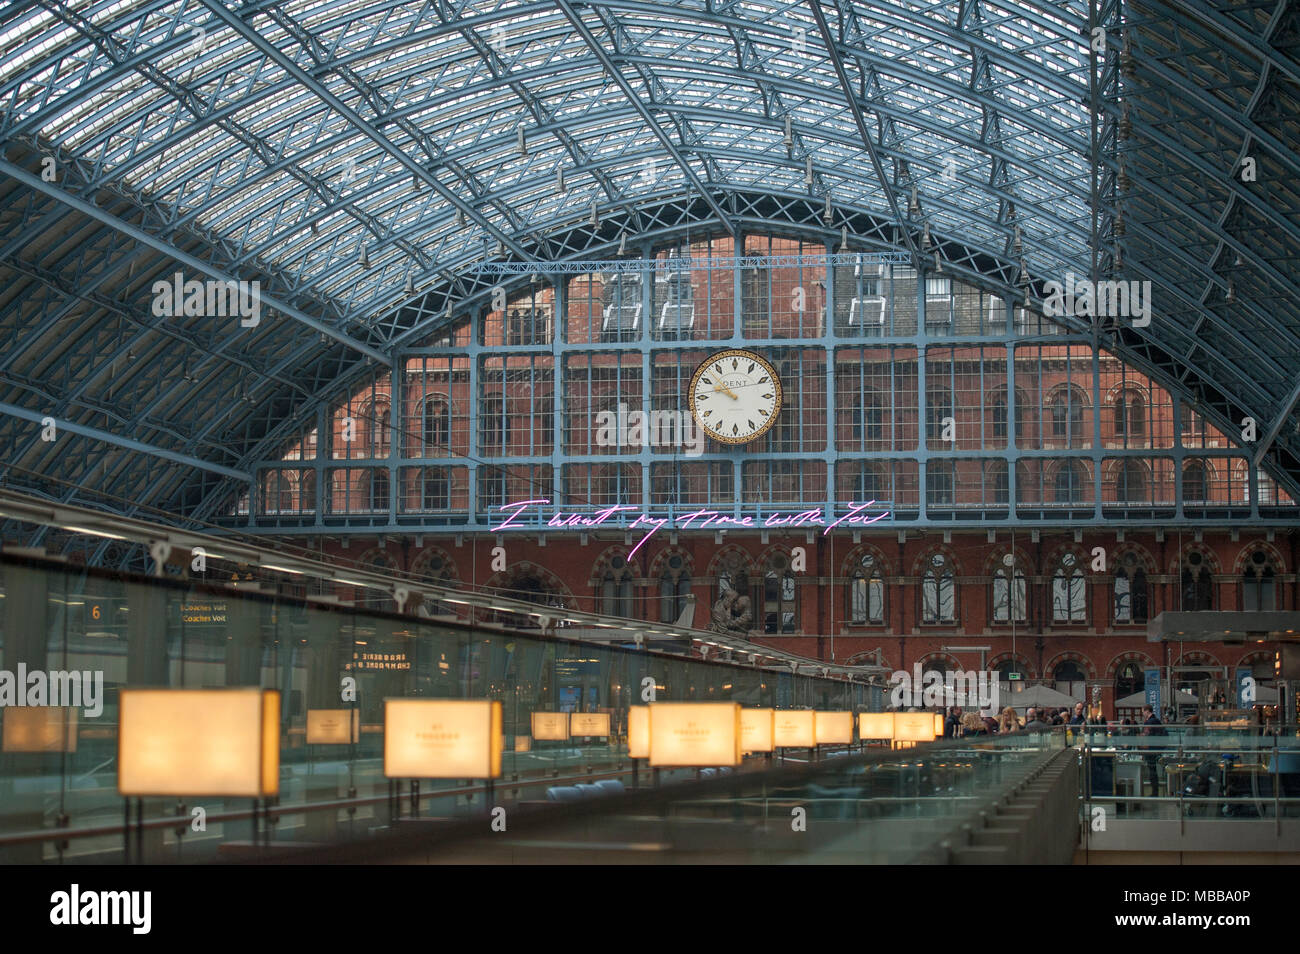 St Pancras station, London, UK. 10 April 2018. In celebration of the 150th anniversary of St Pancras International and the 250th anniversary of the RA, Tracey Emin CBE RA presents a free public Terrace Wires installation suspended from the station’s Victorian glass roof. The largest text piece she has ever made reminds travellers to stop and take a moment in one of the UK’s busiest railway stations. I Want My Time With You hangs directly below the St Pancras clock. Credit: Malcolm Park/Alamy Live News. Stock Photo